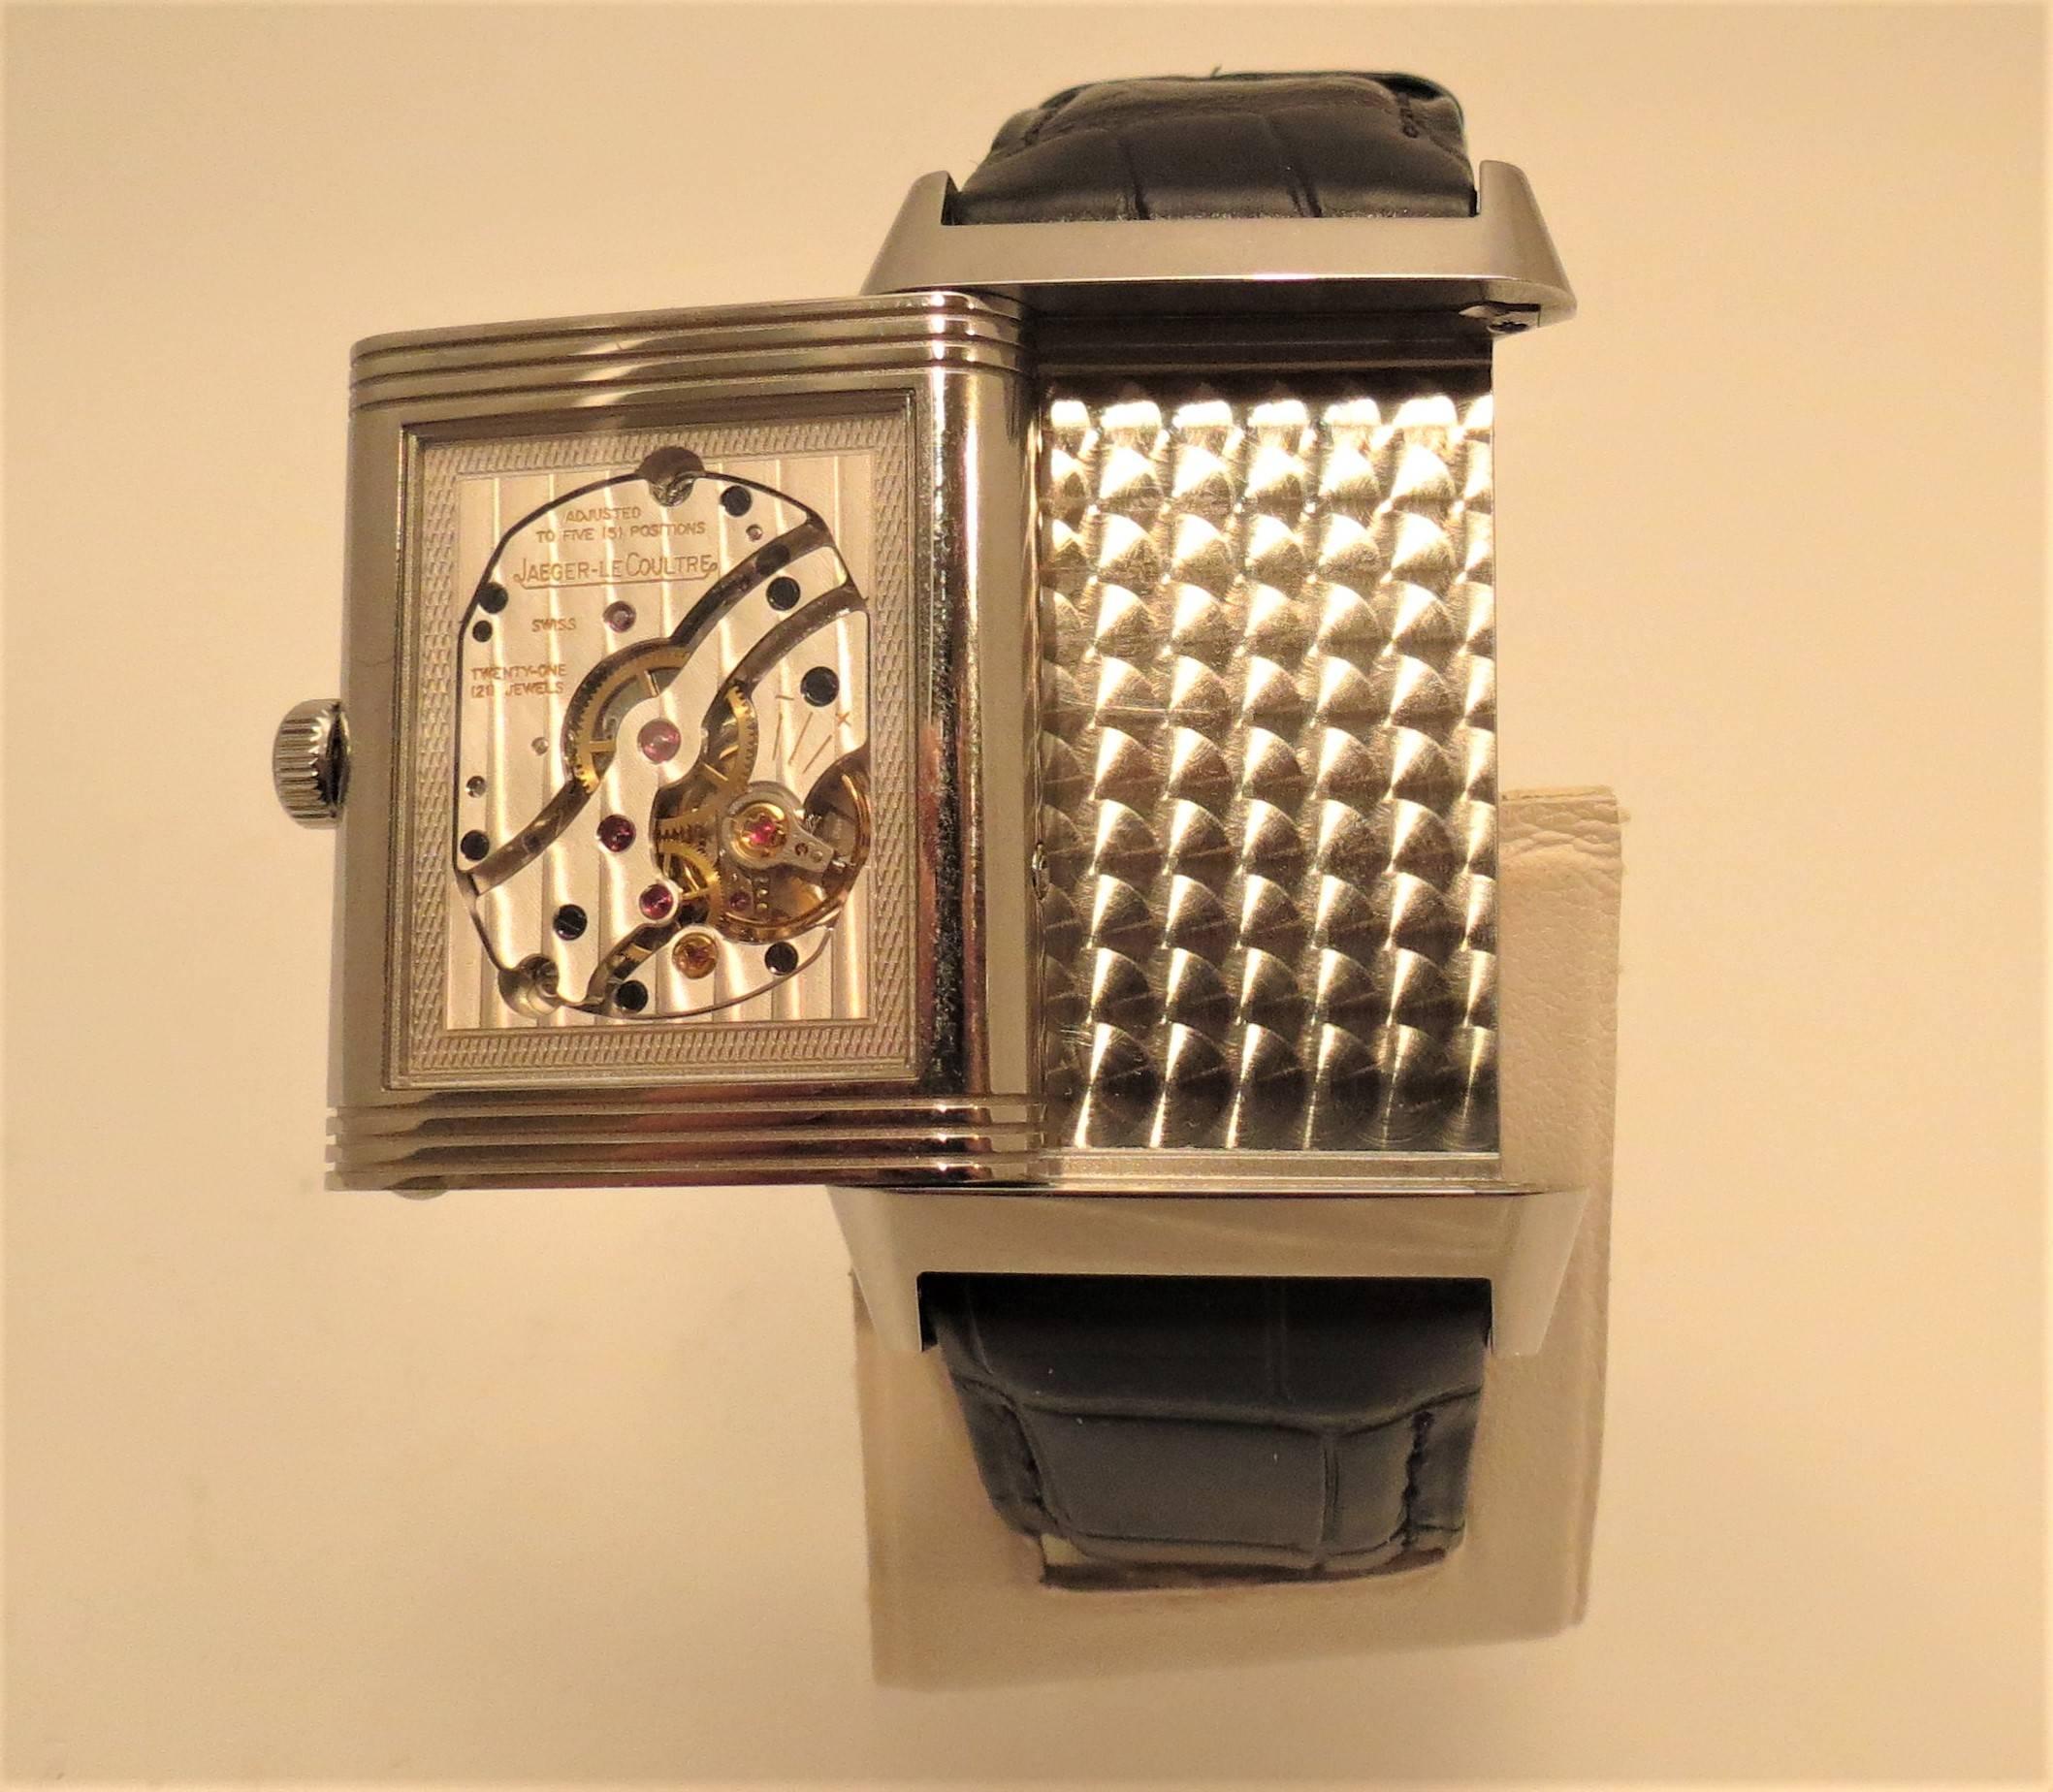 Brand new, Never Worn Jaeger LeCoultre stainless steel Grand Reverso watch, with deployant buckle, manual wind, 45 hour power reserve, moon phase, day and date, case length 48.5 mm and case width 29.5 mm, black alligator strap.

Brand new, never